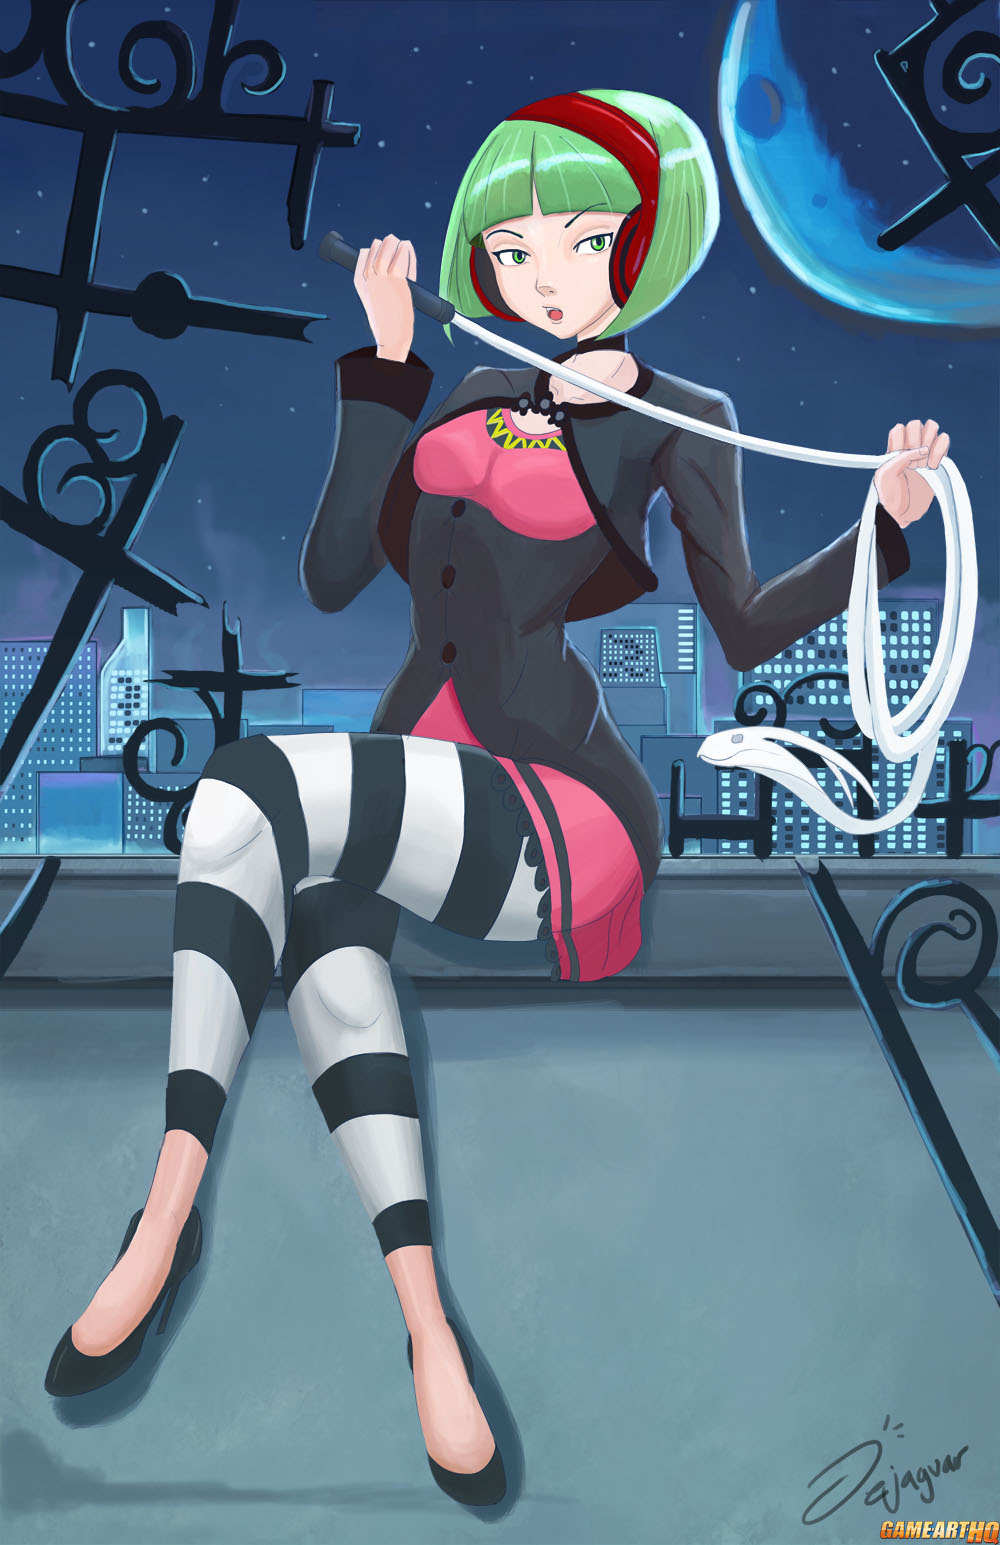 Phonon from Under Night In-Birth